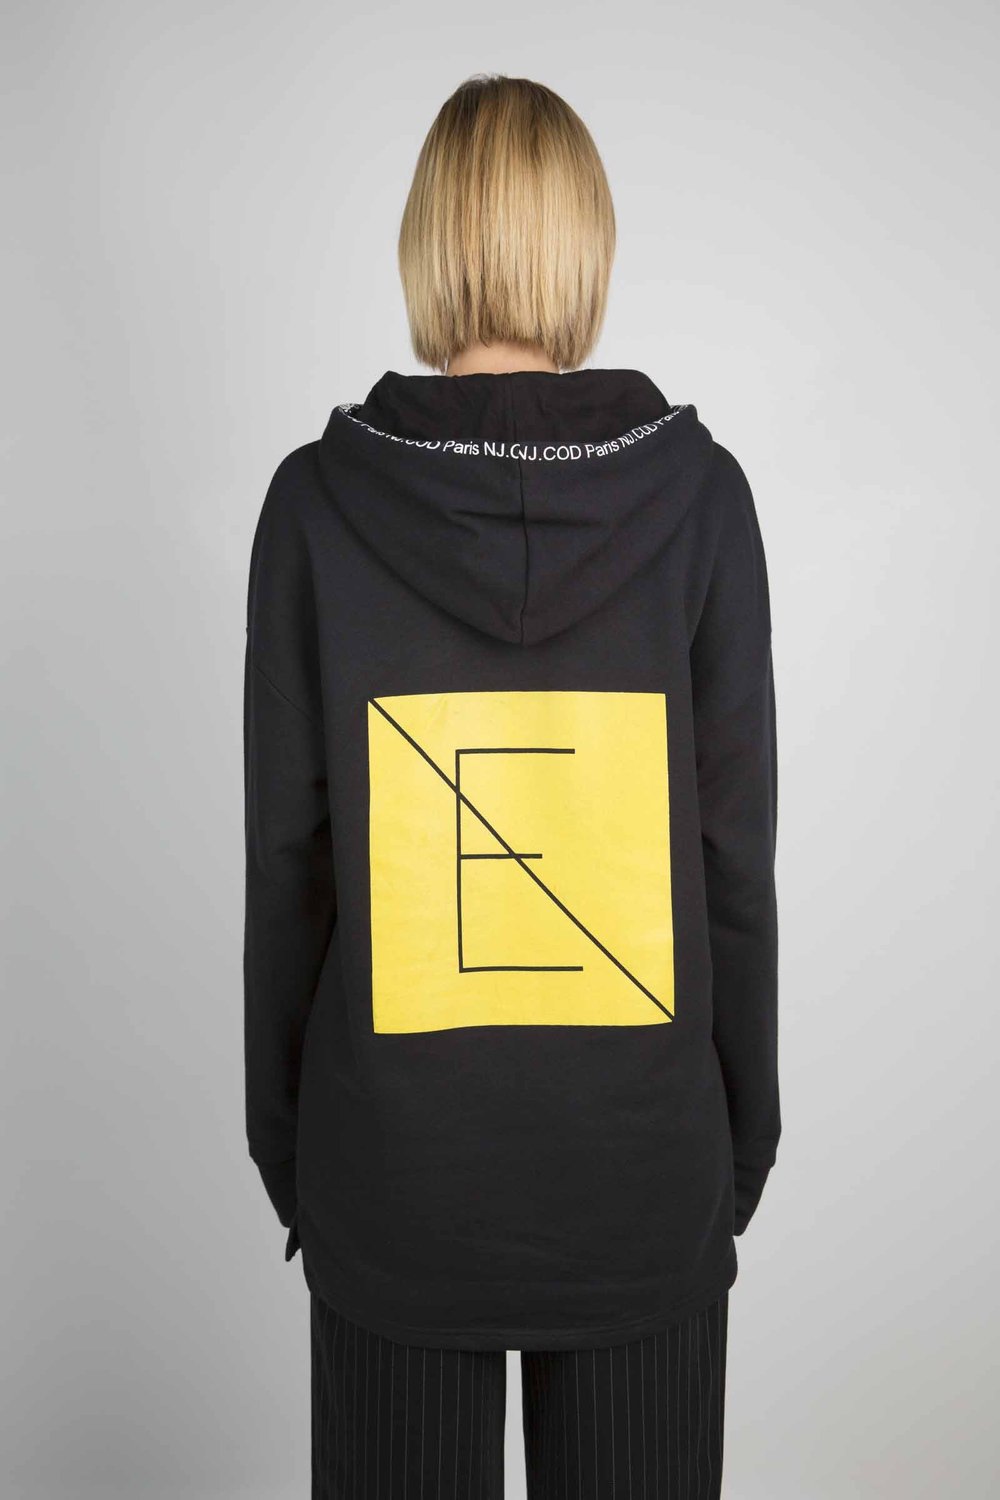 Image of NJ.COD - Hoodie Without E <s>€75.00</s>